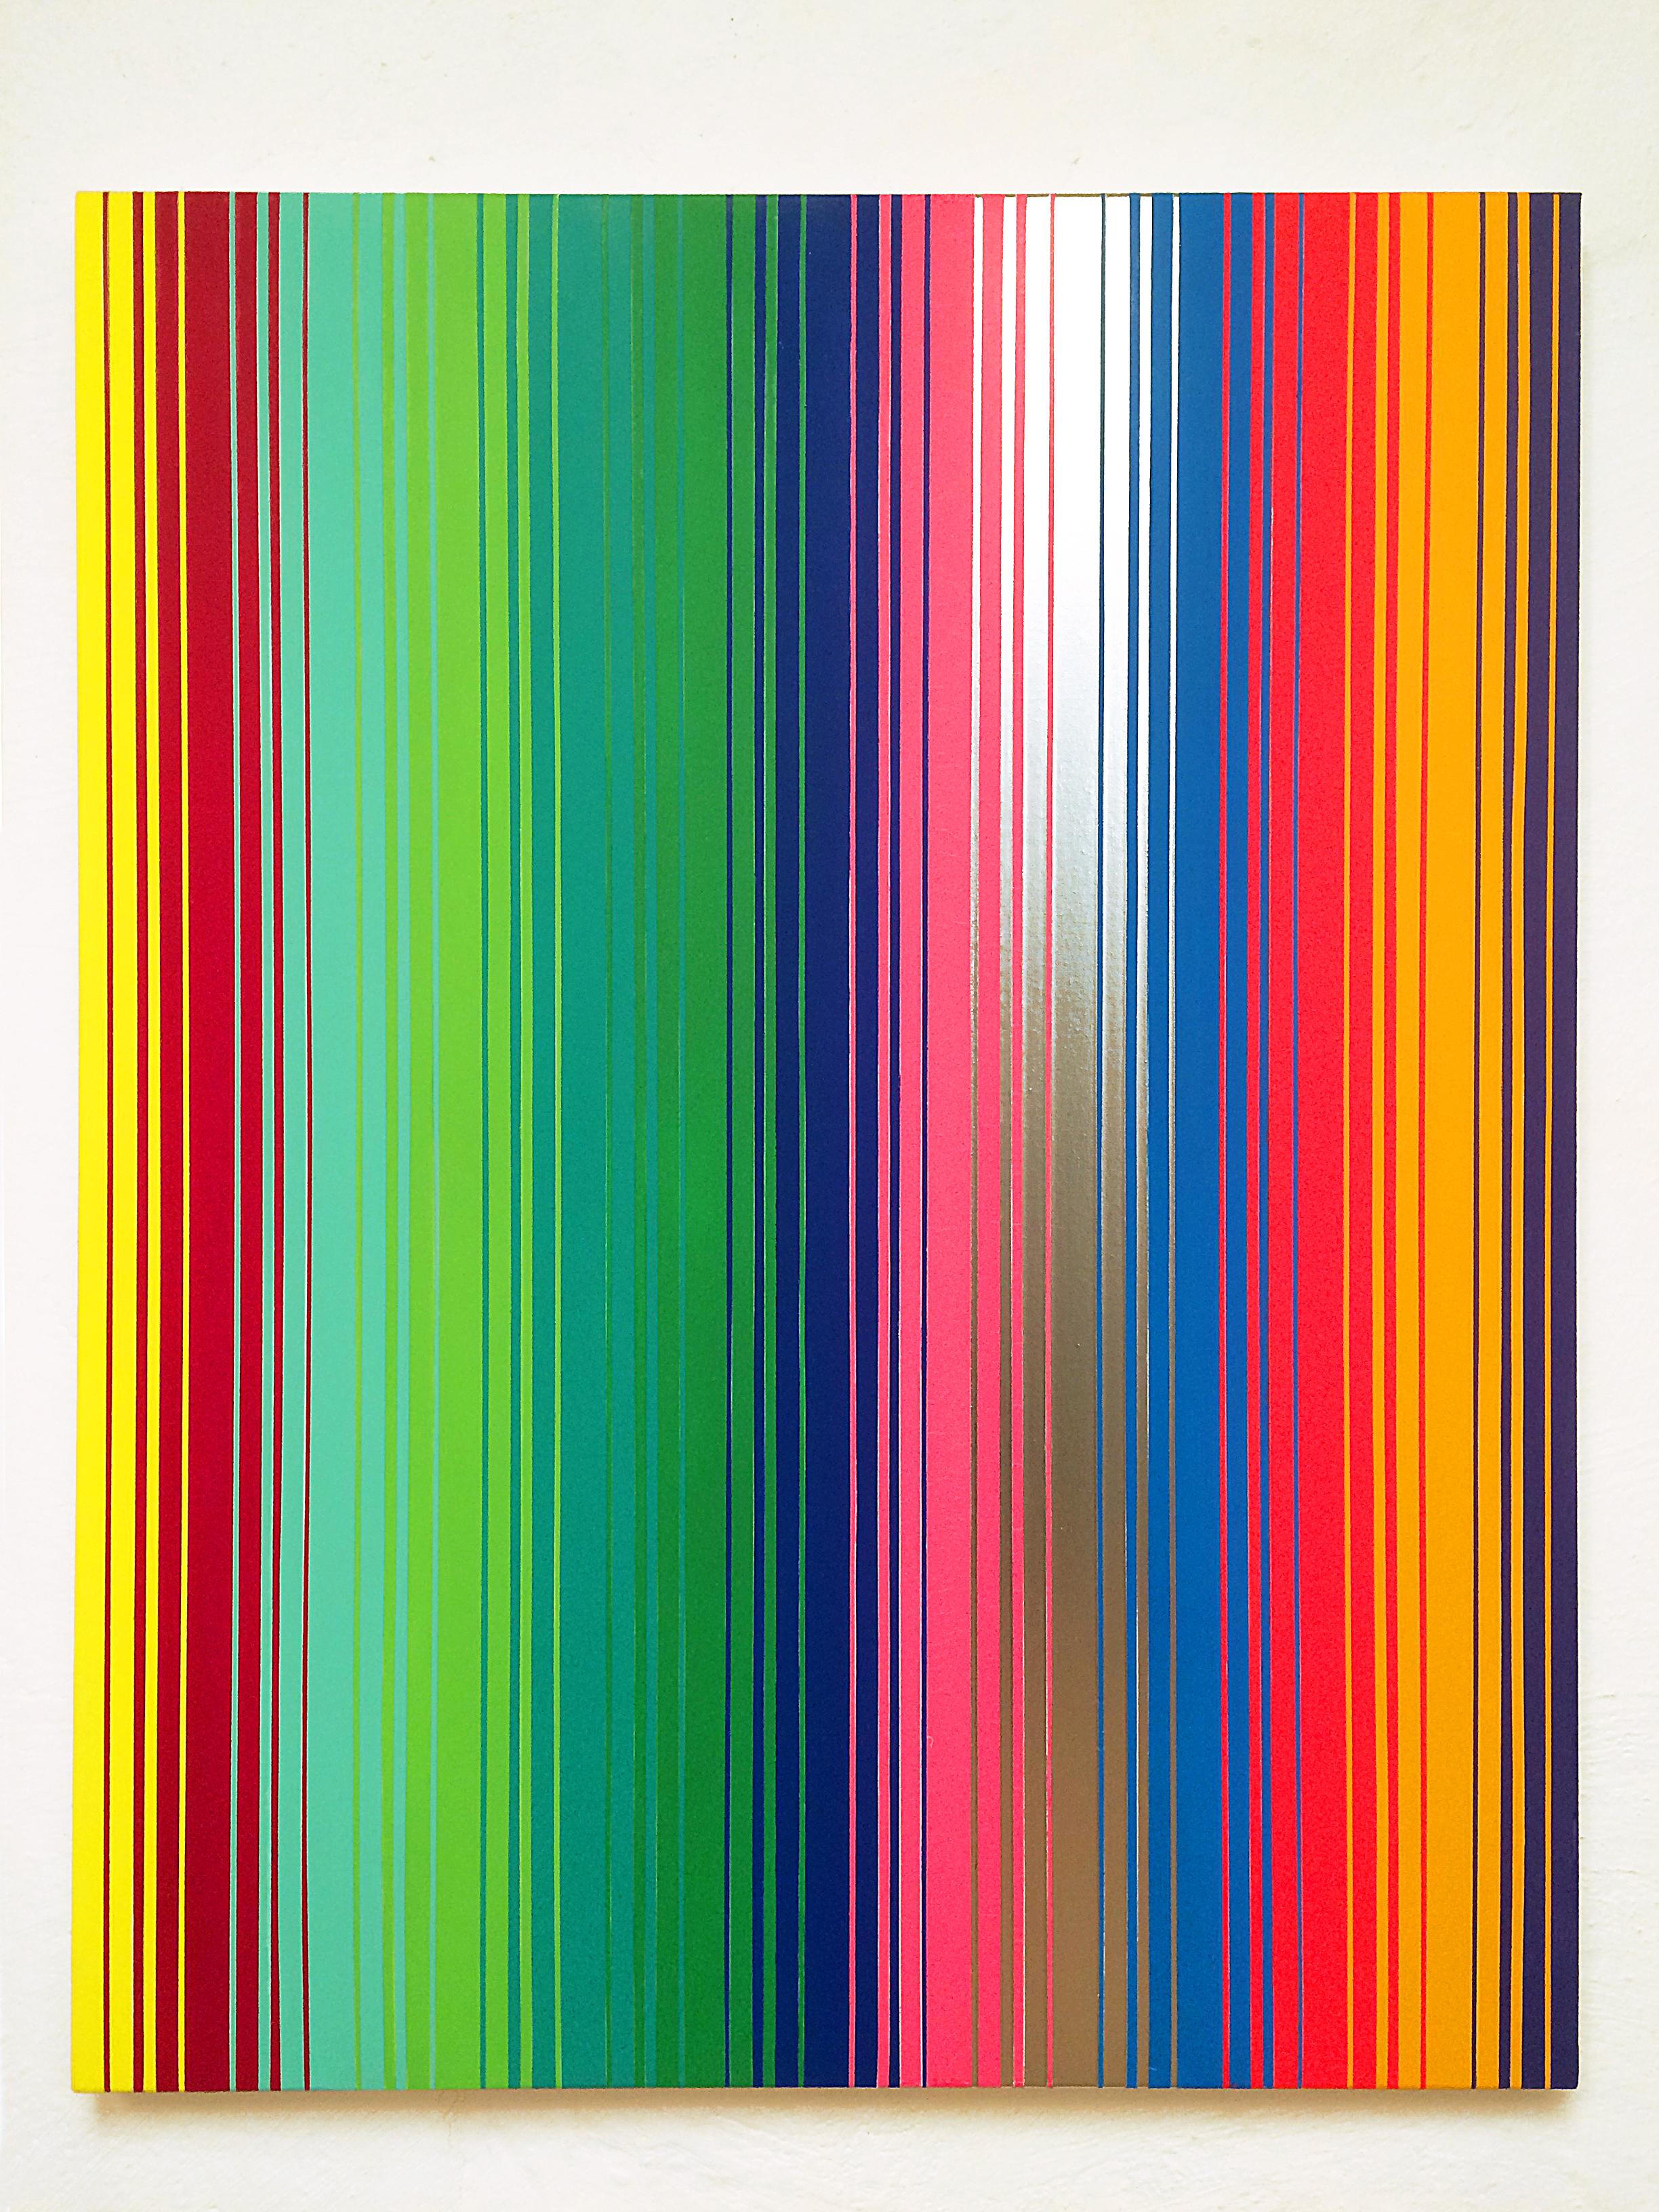 "Sequence No. 16", 2015, acrylic and enamel on canvas, 100 x 80 cm.